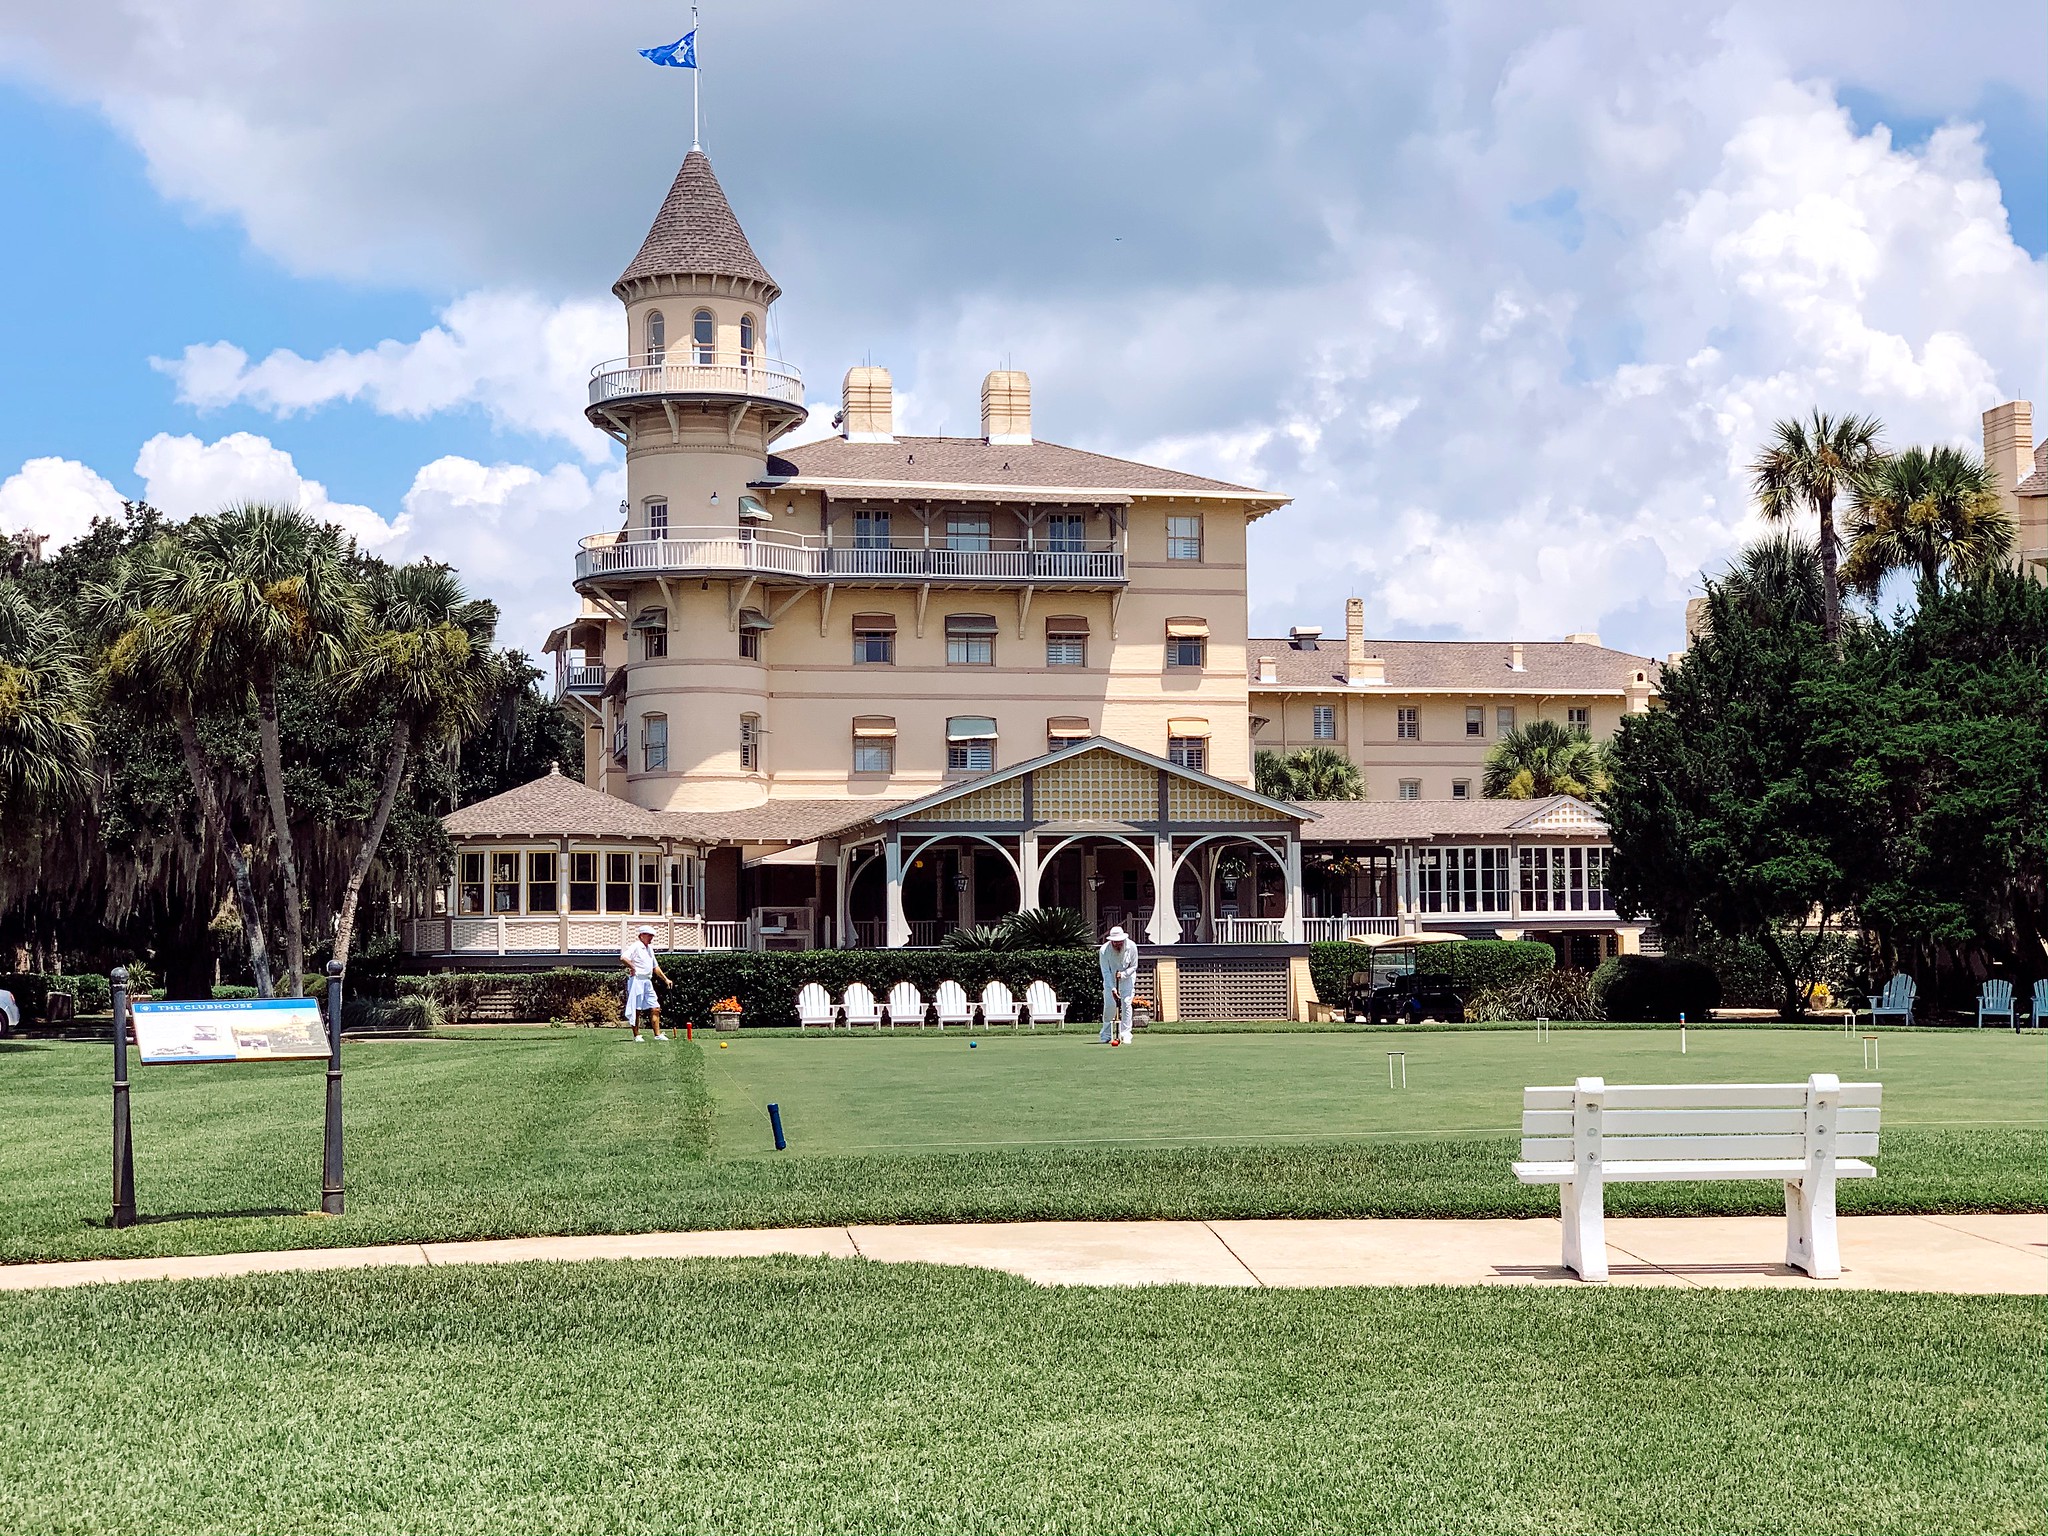 Your Complete Guide to an Amazing Jekyll Island Vacation